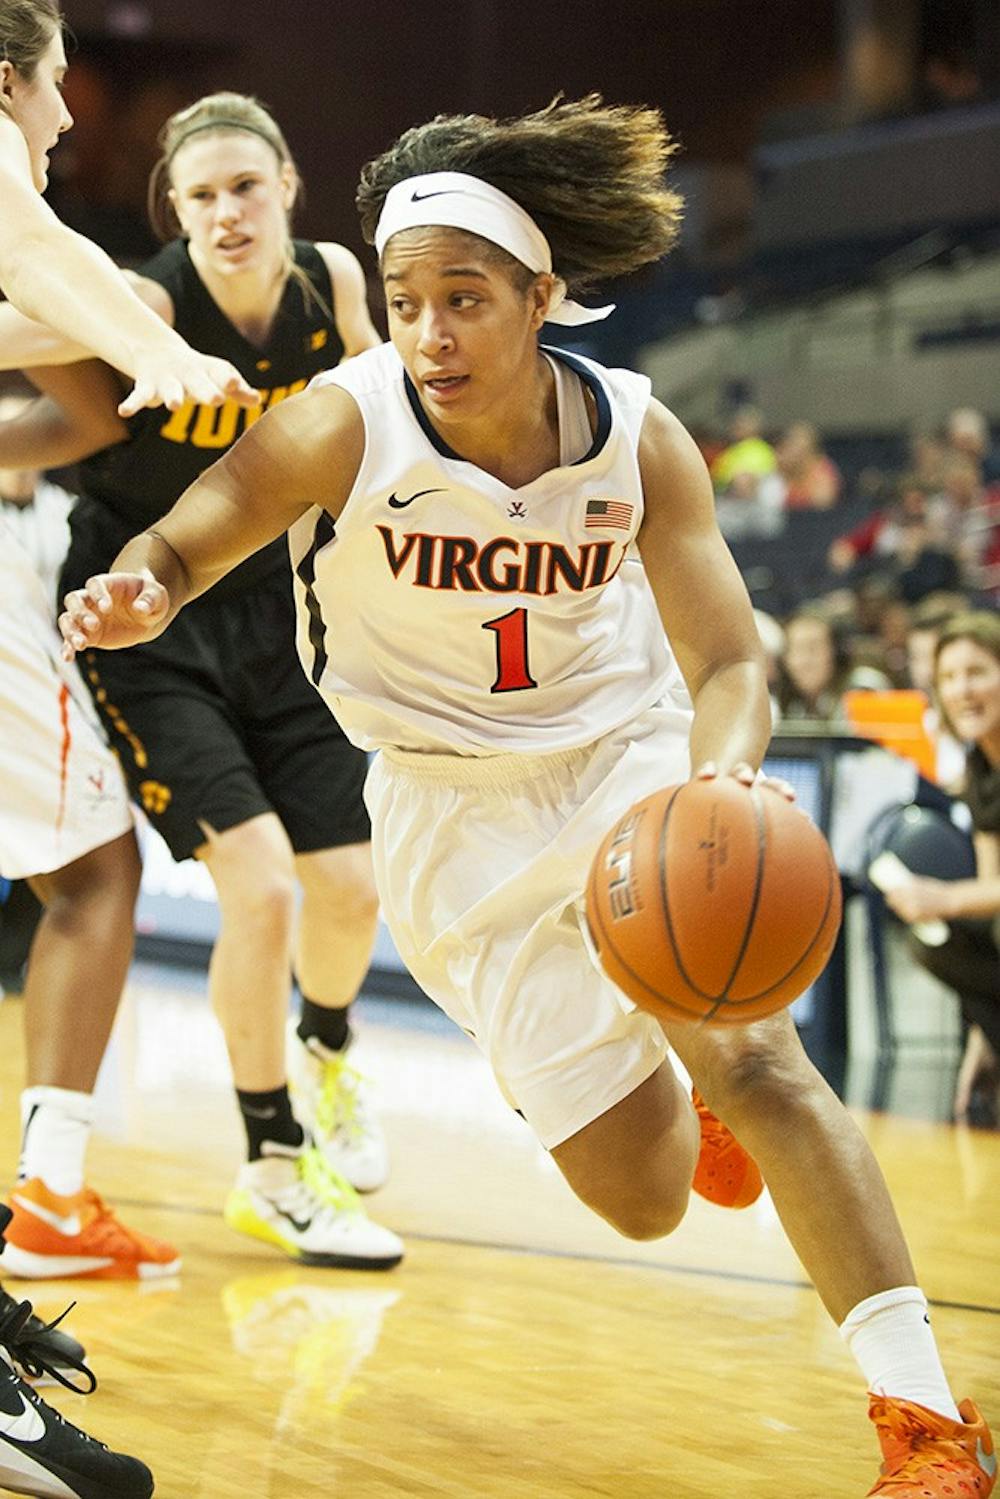 <p>Sophomore guard Mikayla Venson scored 14 points in a losing effort to N.C. State.</p>